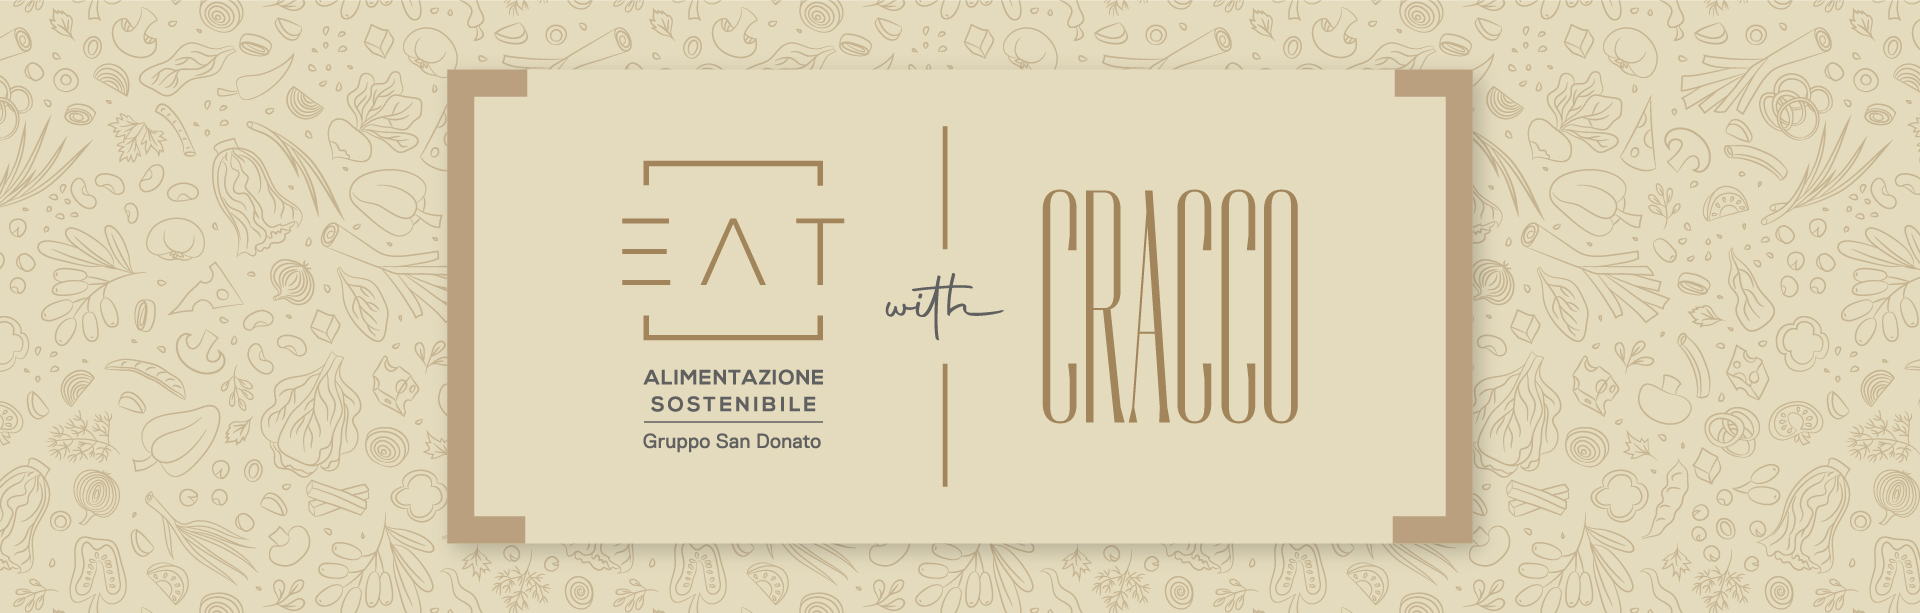 EAT With Cracco